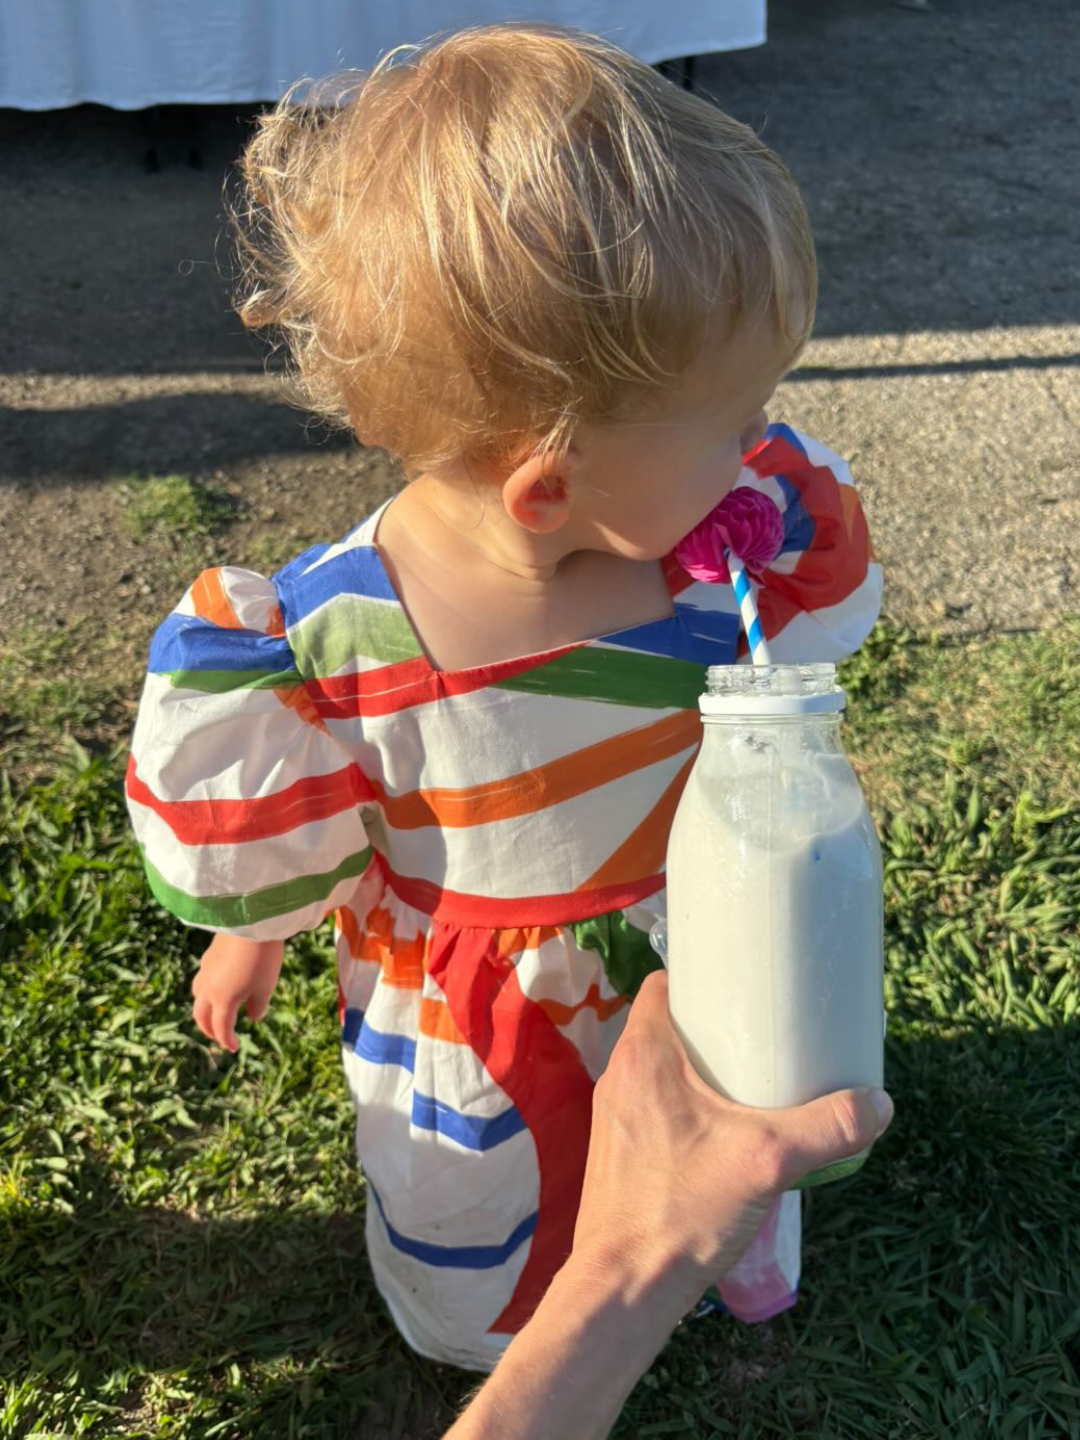 Colors | A toddler wearing the kids Glow Dress in colors featuring paintbrush-style lines of bold color all over a white cotton dress. She is drinking milk from a bottle with a straw, held by an adult's hand, and standing on grass looking away from camera.